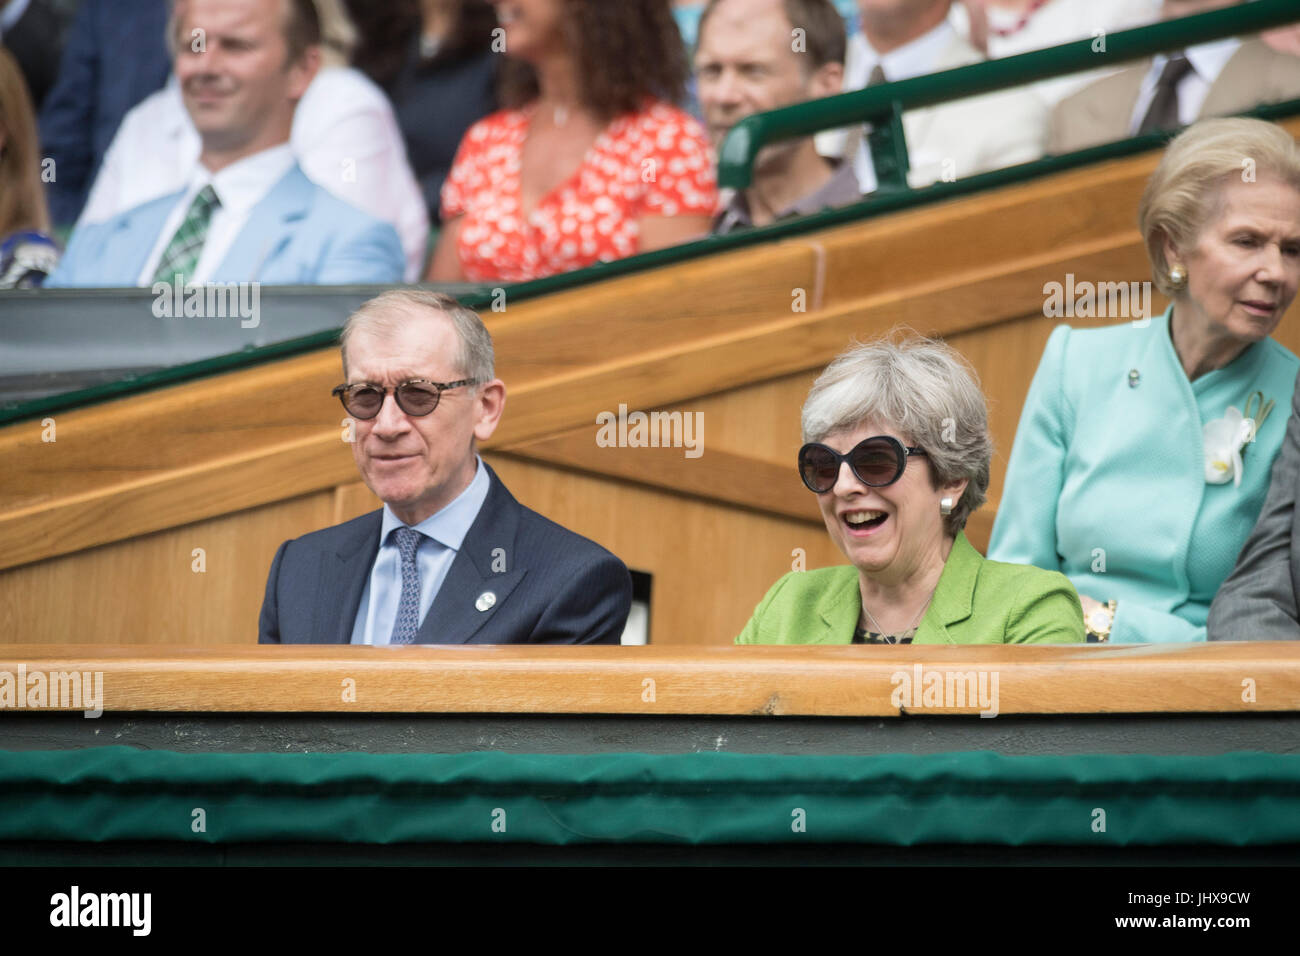 Wimbledon, London, UK. 16th July, 2017. The Wimbledon Tennis Championships 2017 held at The All England Lawn Tennis and Croquet Club, London, England, UK. GENTLEMEN'S SINGLES - FINAL Roger Federer (SUI) [3] v Marin Cilic (CRO) [7] on Centre Court. Prime Minister Theresa May watches the match from the Royal Box with her husband Philip. Credit: Duncan Grove/Alamy Live News Stock Photo